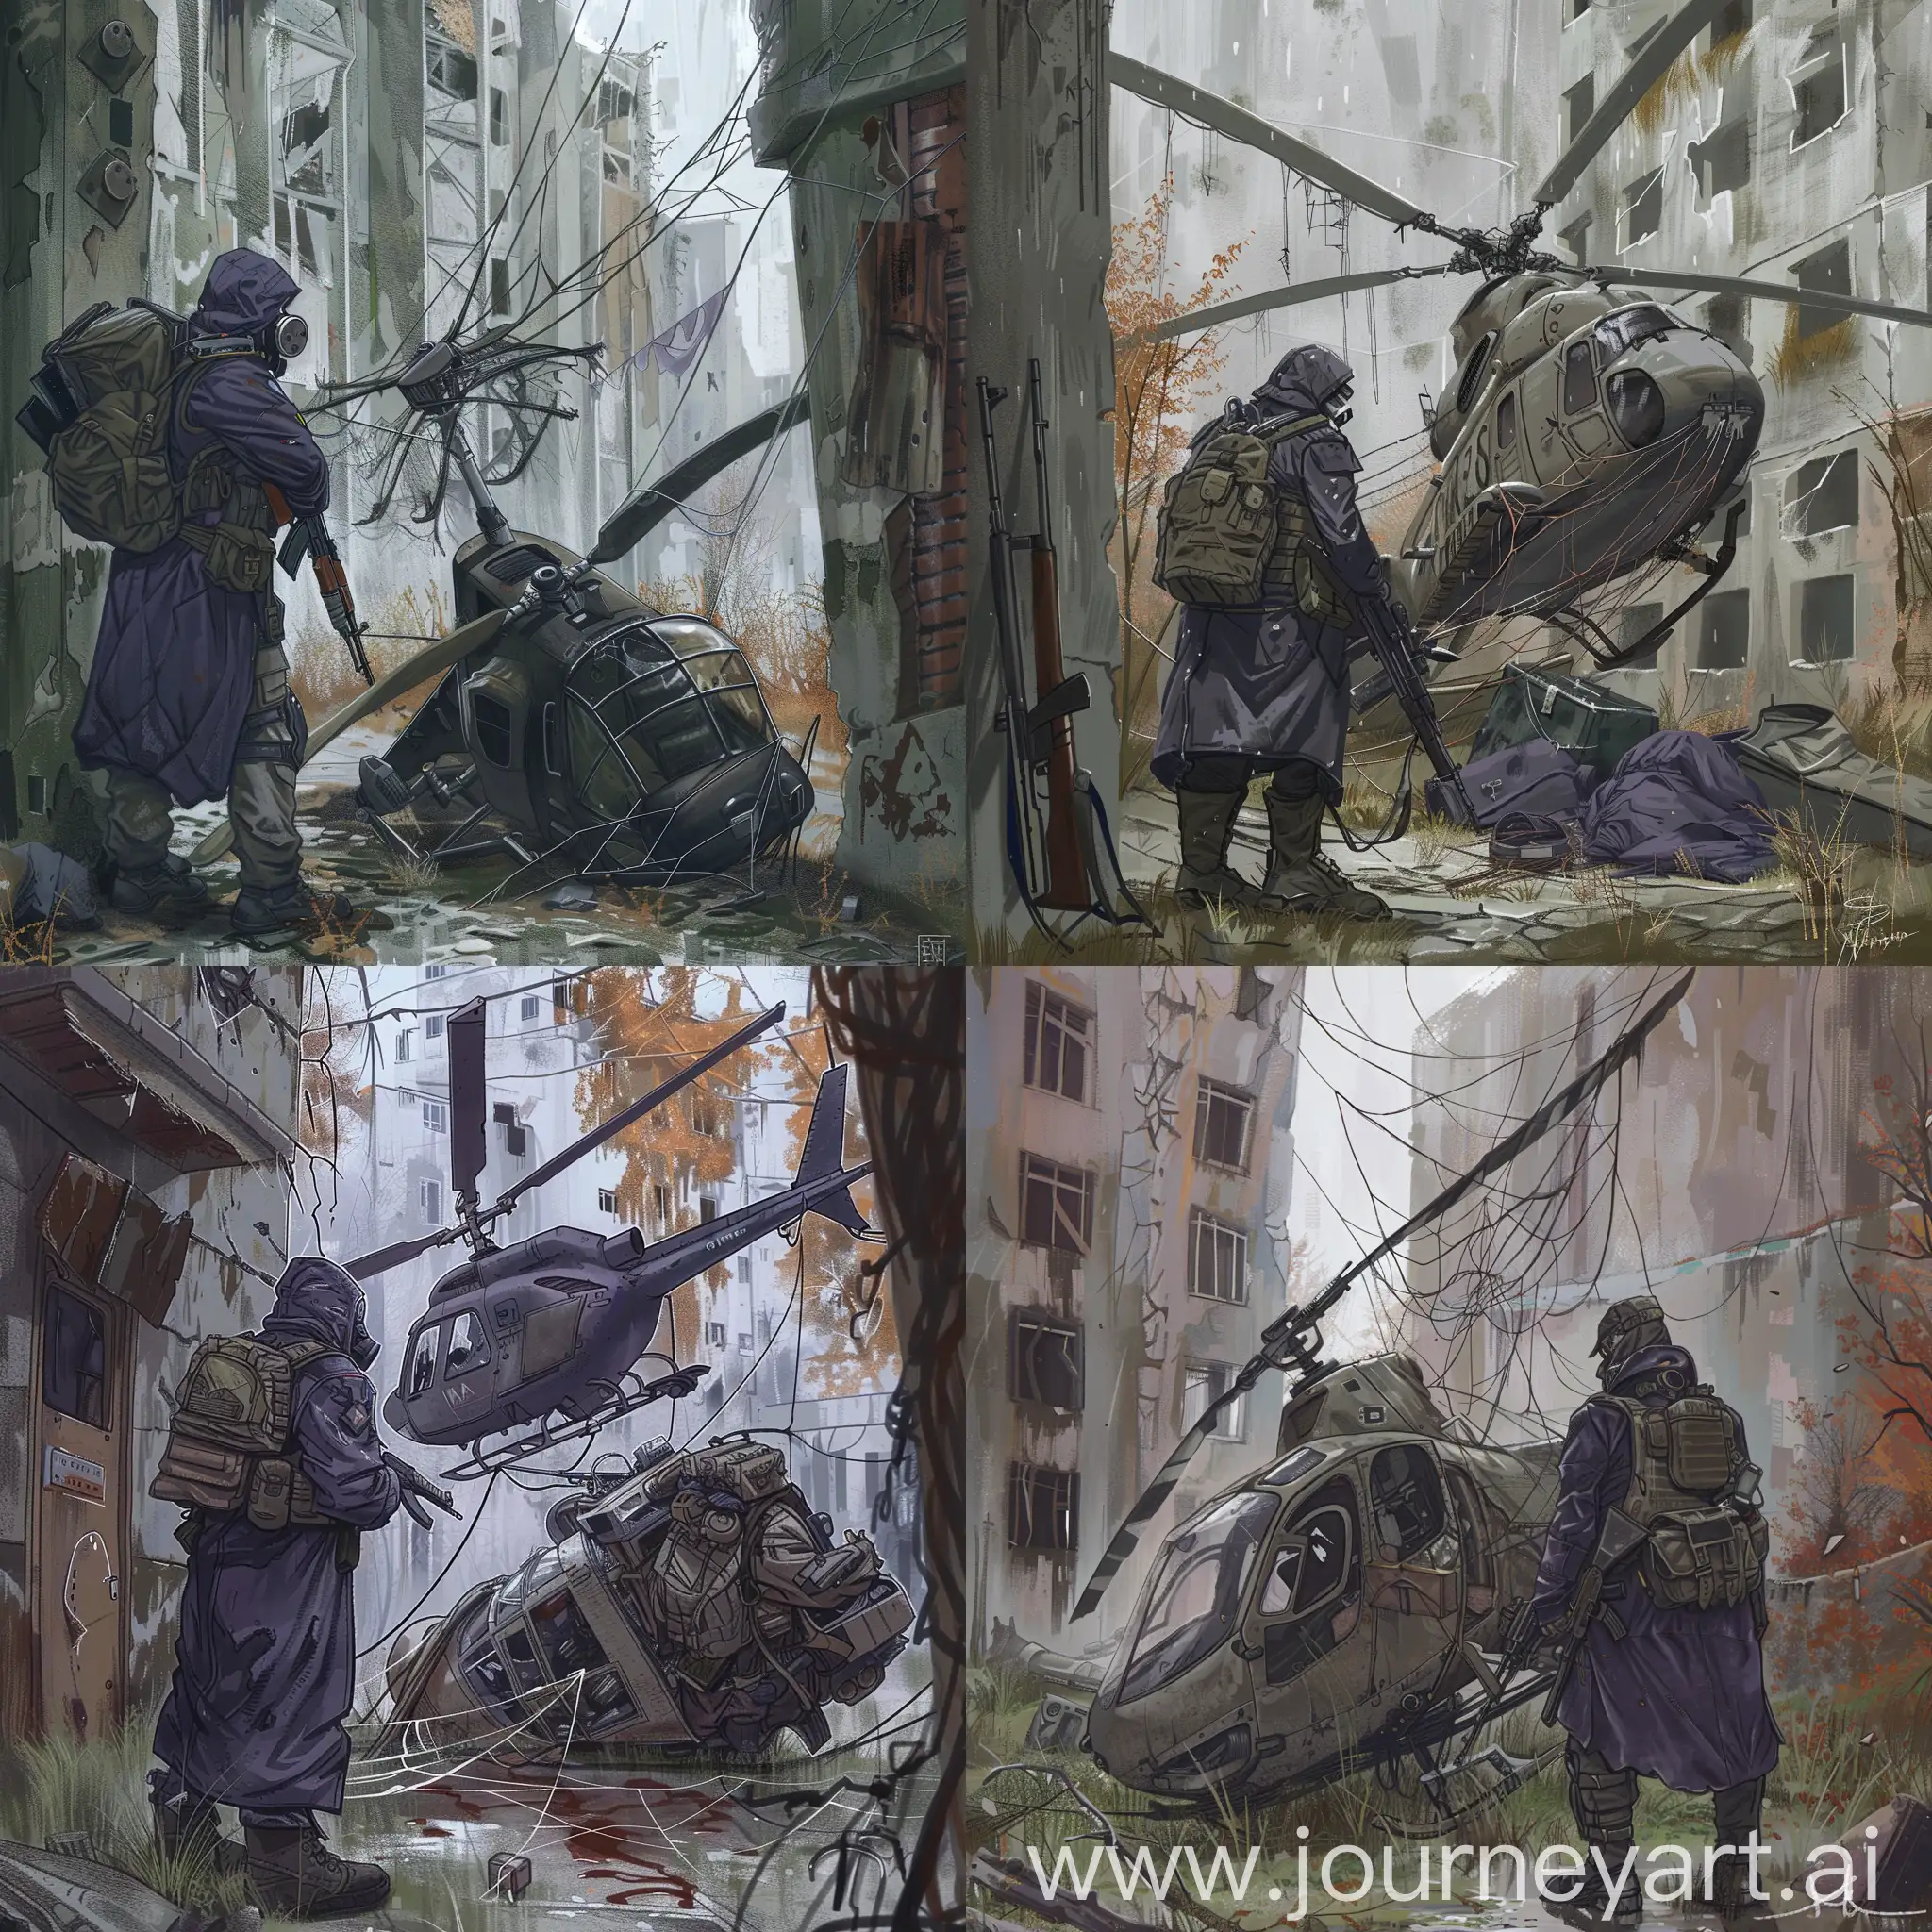 Digital  art, mercenary from the universe of S.T.A.L.K.E.R., dressed in a dark blue military raincoat, gray military armor on his body, a gasmask on his face, a military backpack on his back, a rifle in his hands, mercenary stands next to a crashed military helicopter that is entangled in a strange web between two Soviet abandoned buildings, Chernobyl, gloomy autumn.